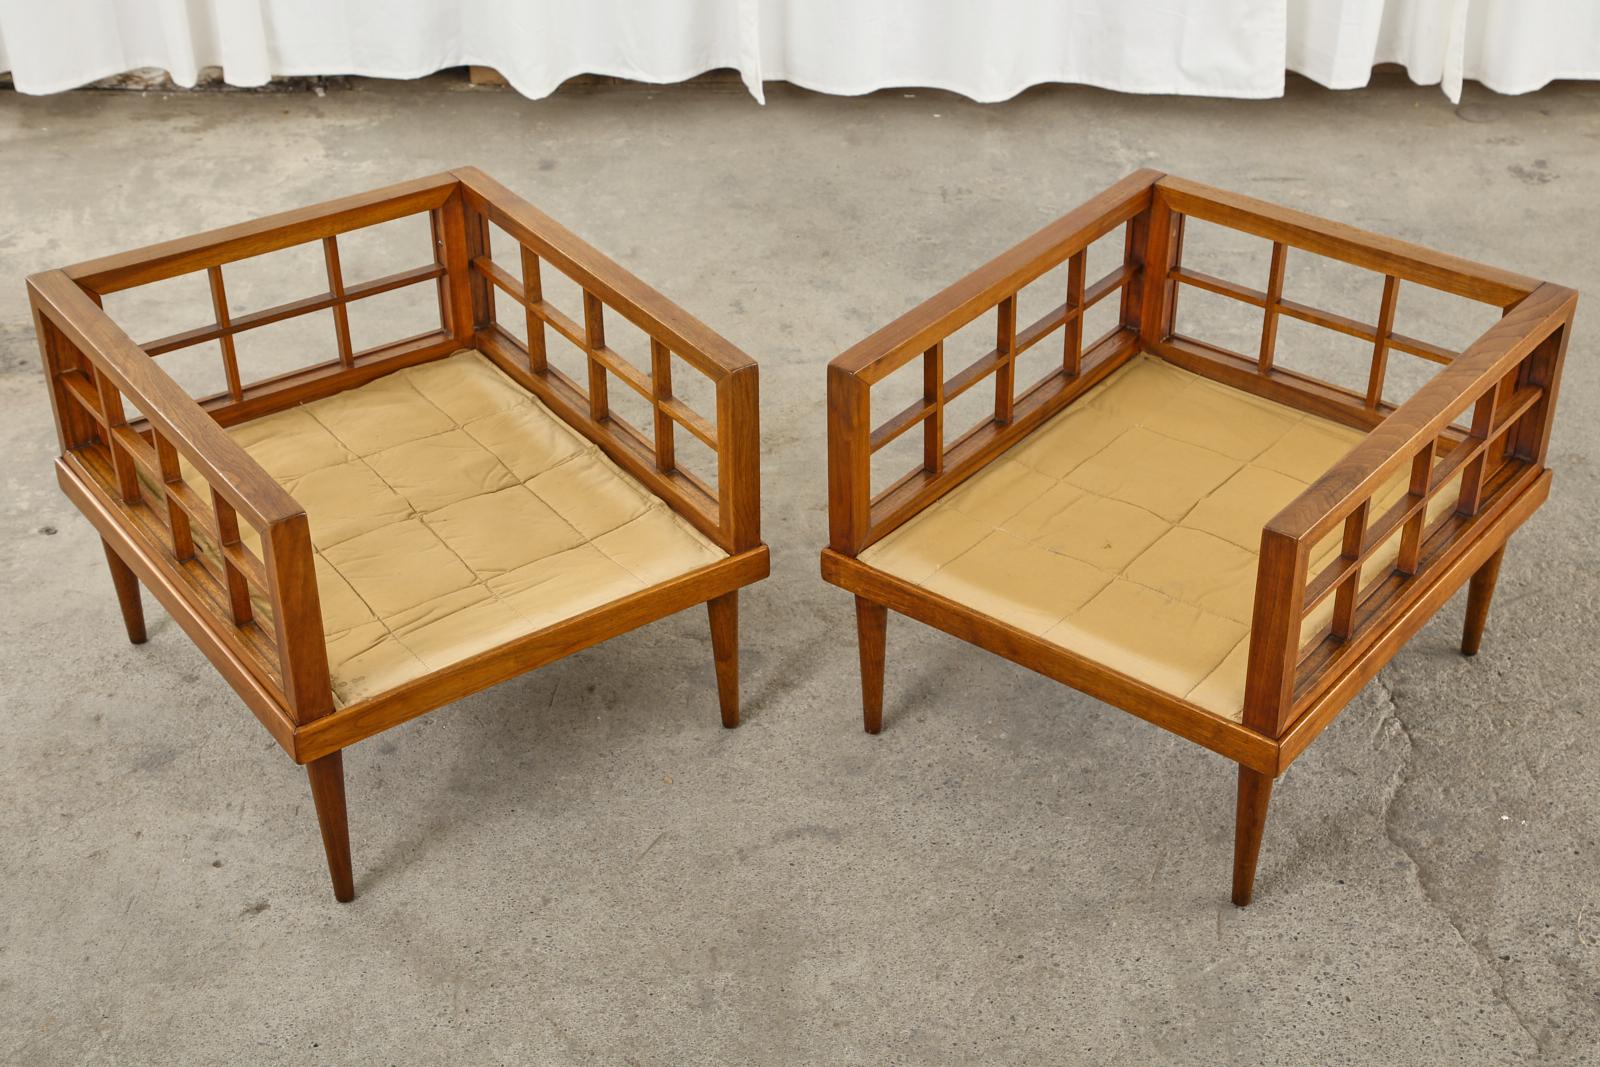 Pair of Mid-Century Mahogany Cube Chairs by Henredon In Good Condition For Sale In Rio Vista, CA